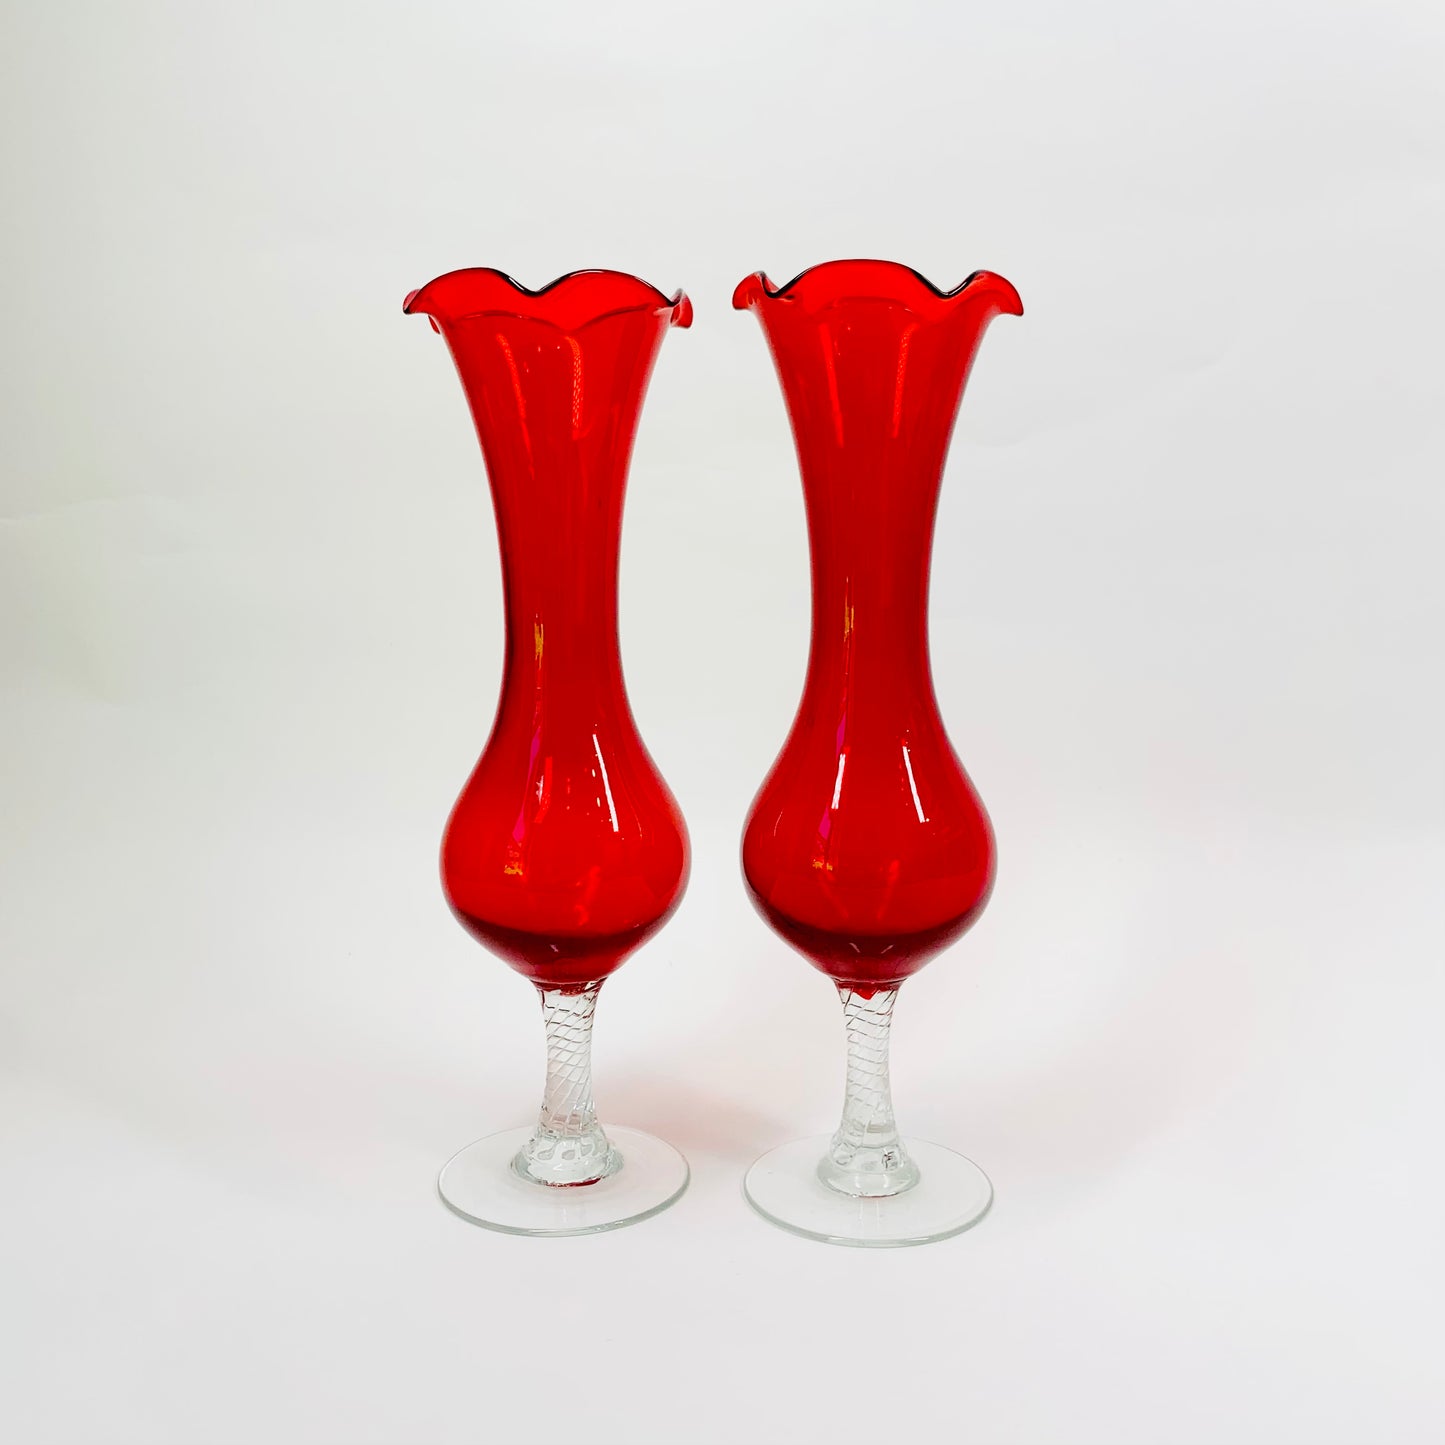 Midcentury Italian red glass footed bud vase with ruffle rim